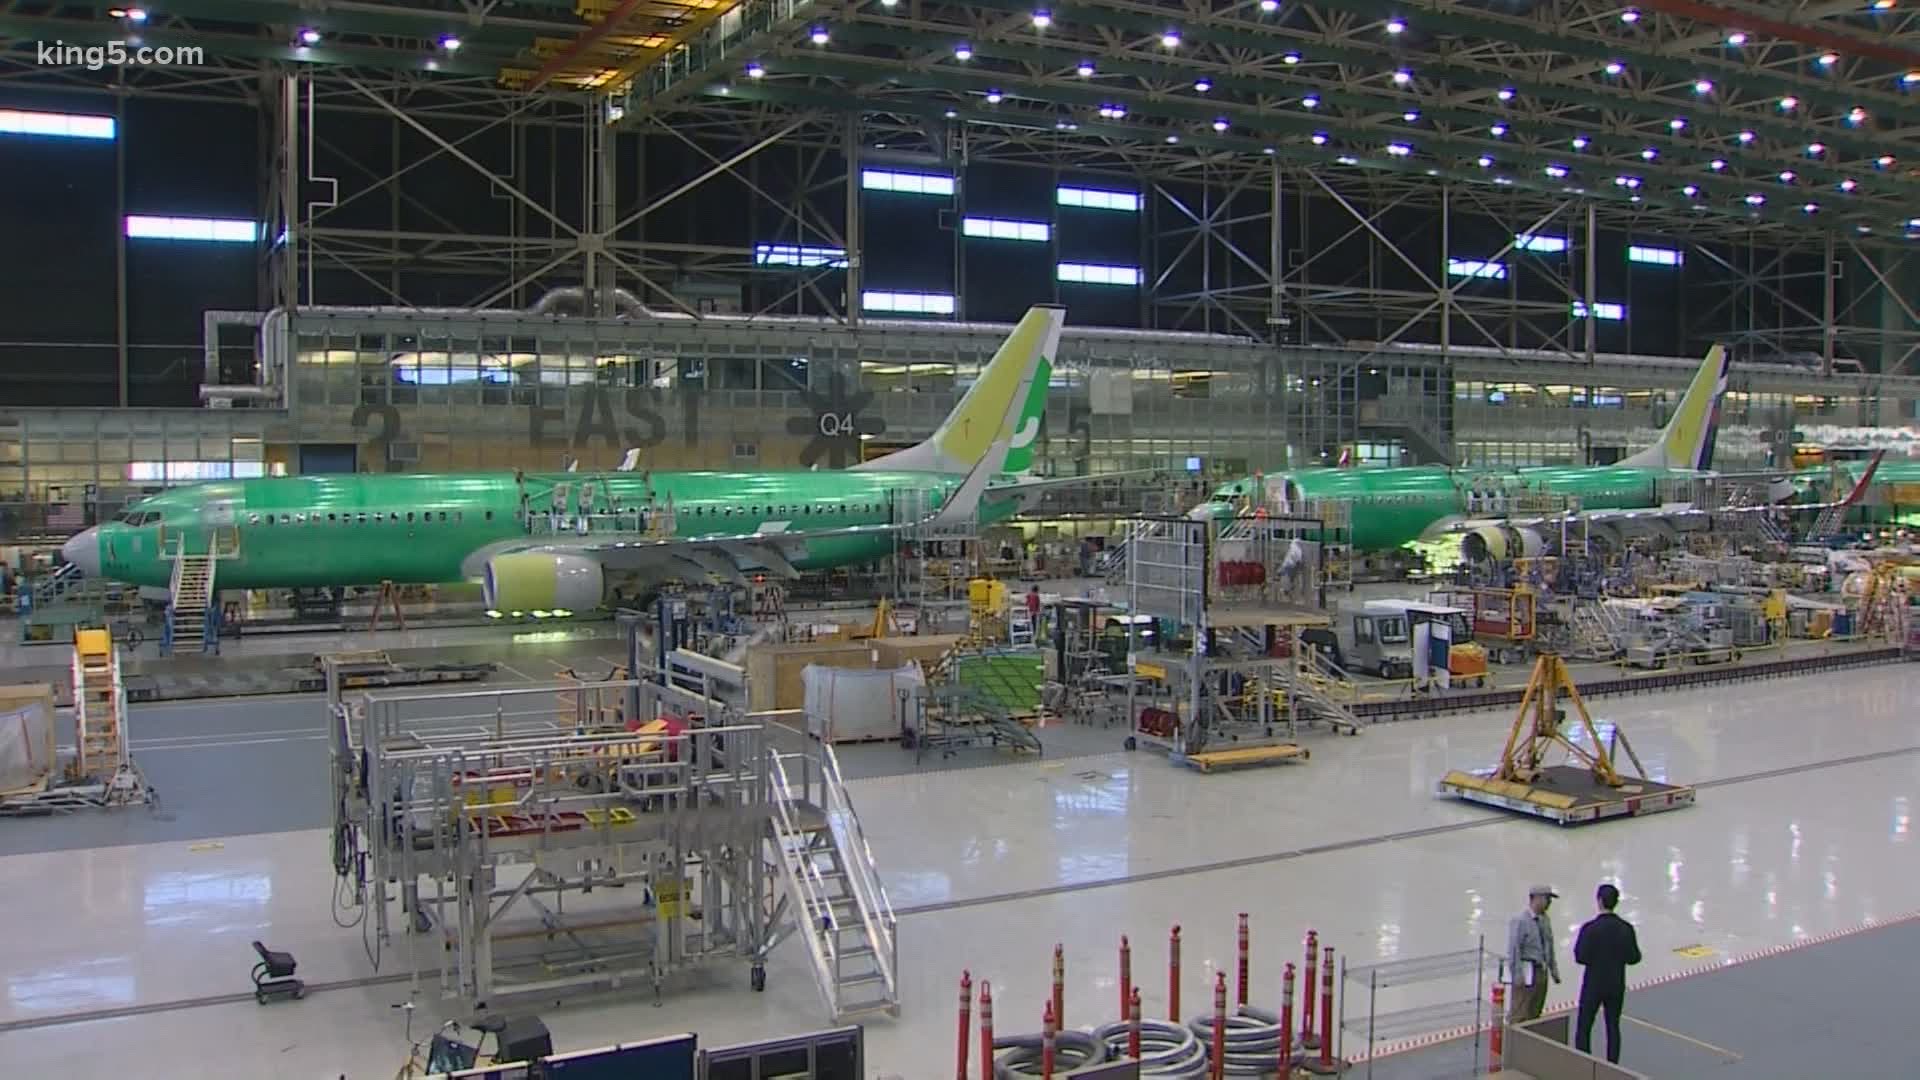 Boeing announces the restart of Renton's production line of the grounded 737 MAX, a bright spot amid other news of around 10,000 company layoffs in Washington state